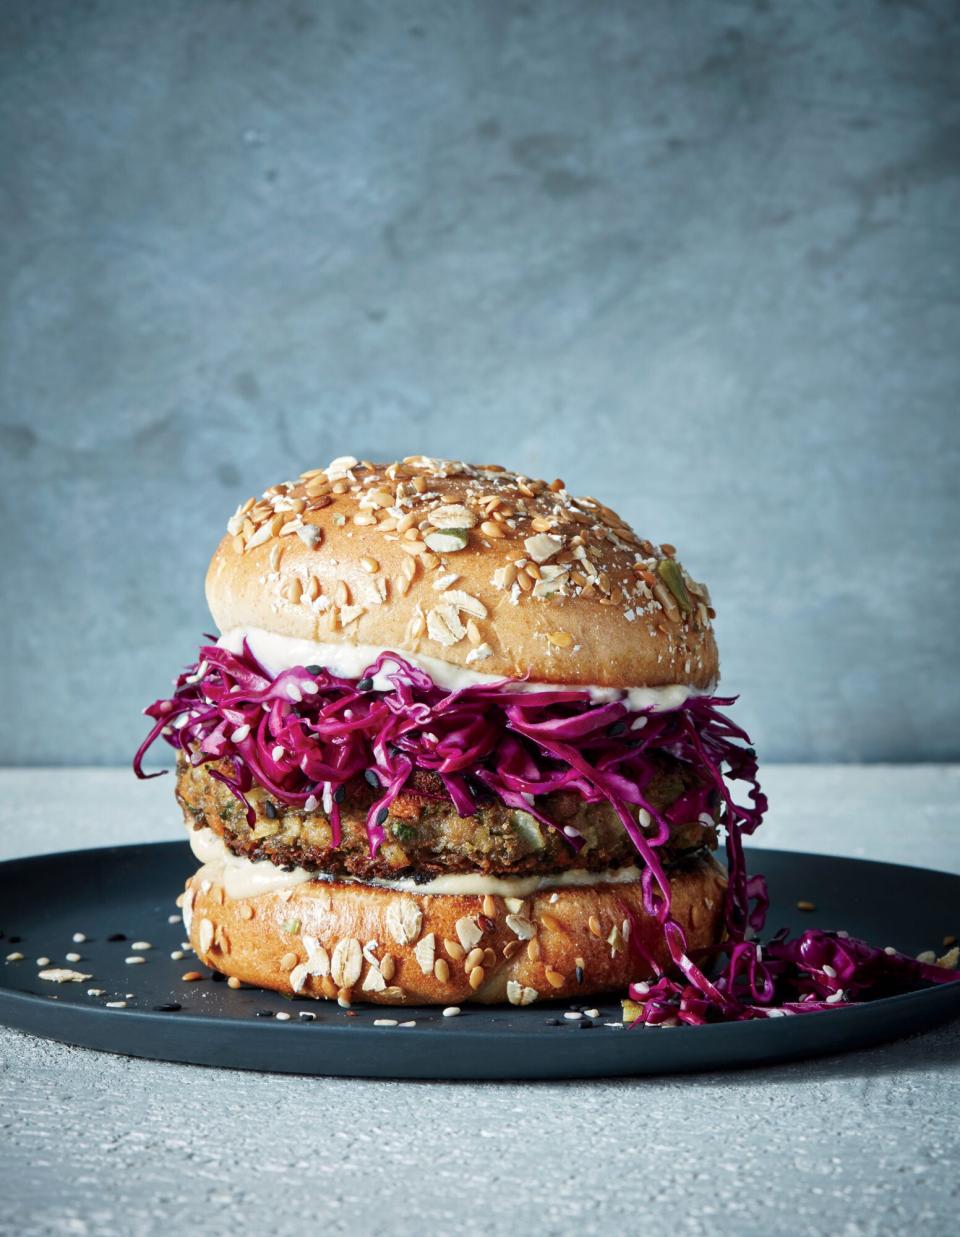 August: Lentil-Tahini Burgers with Pickled Cabbage